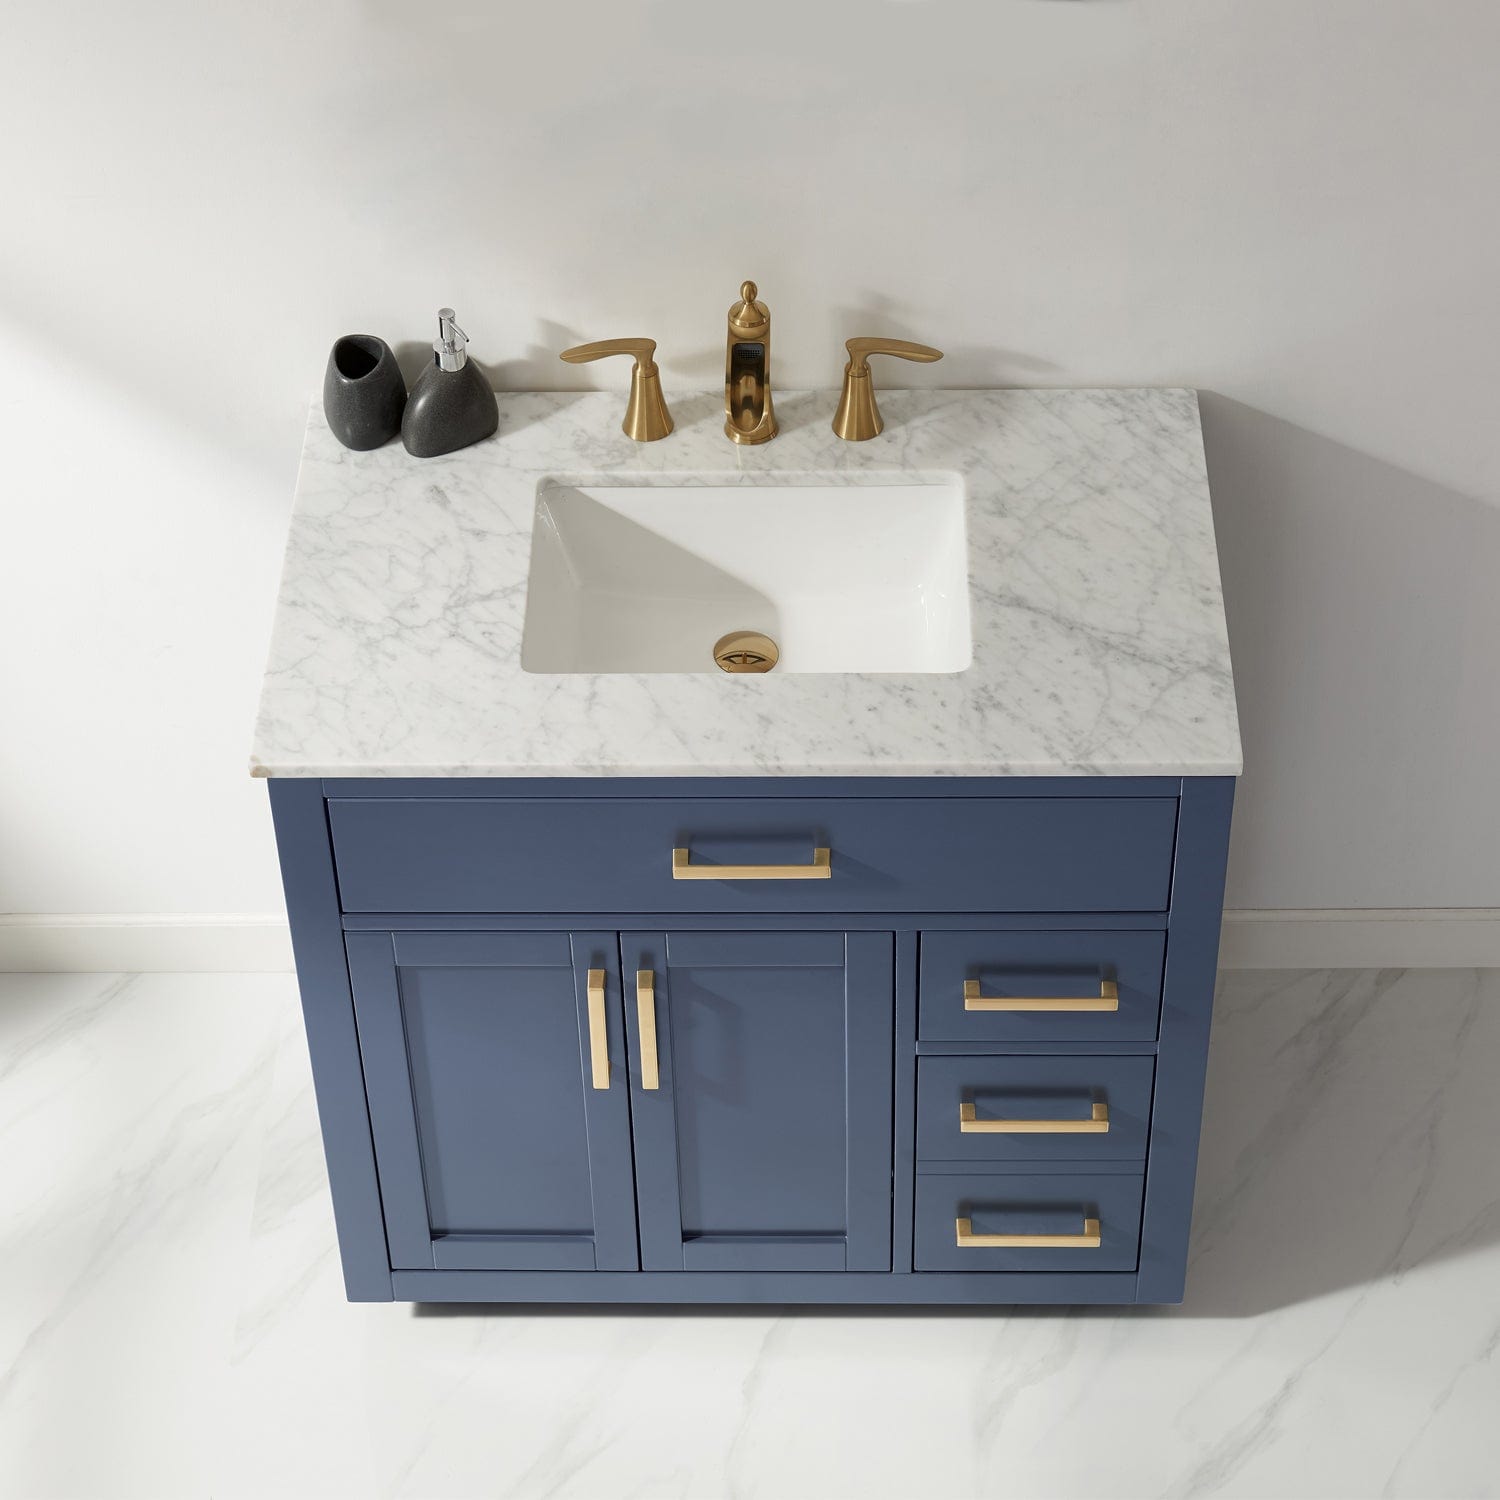 Altair Ivy 36" Single Bathroom Vanity Set in Royal Blue and Carrara White Marble Countertop without Mirror 531036-RB-CA-NM - Molaix631112971126Altair Design USA Vanities531036-RB-CA-NM